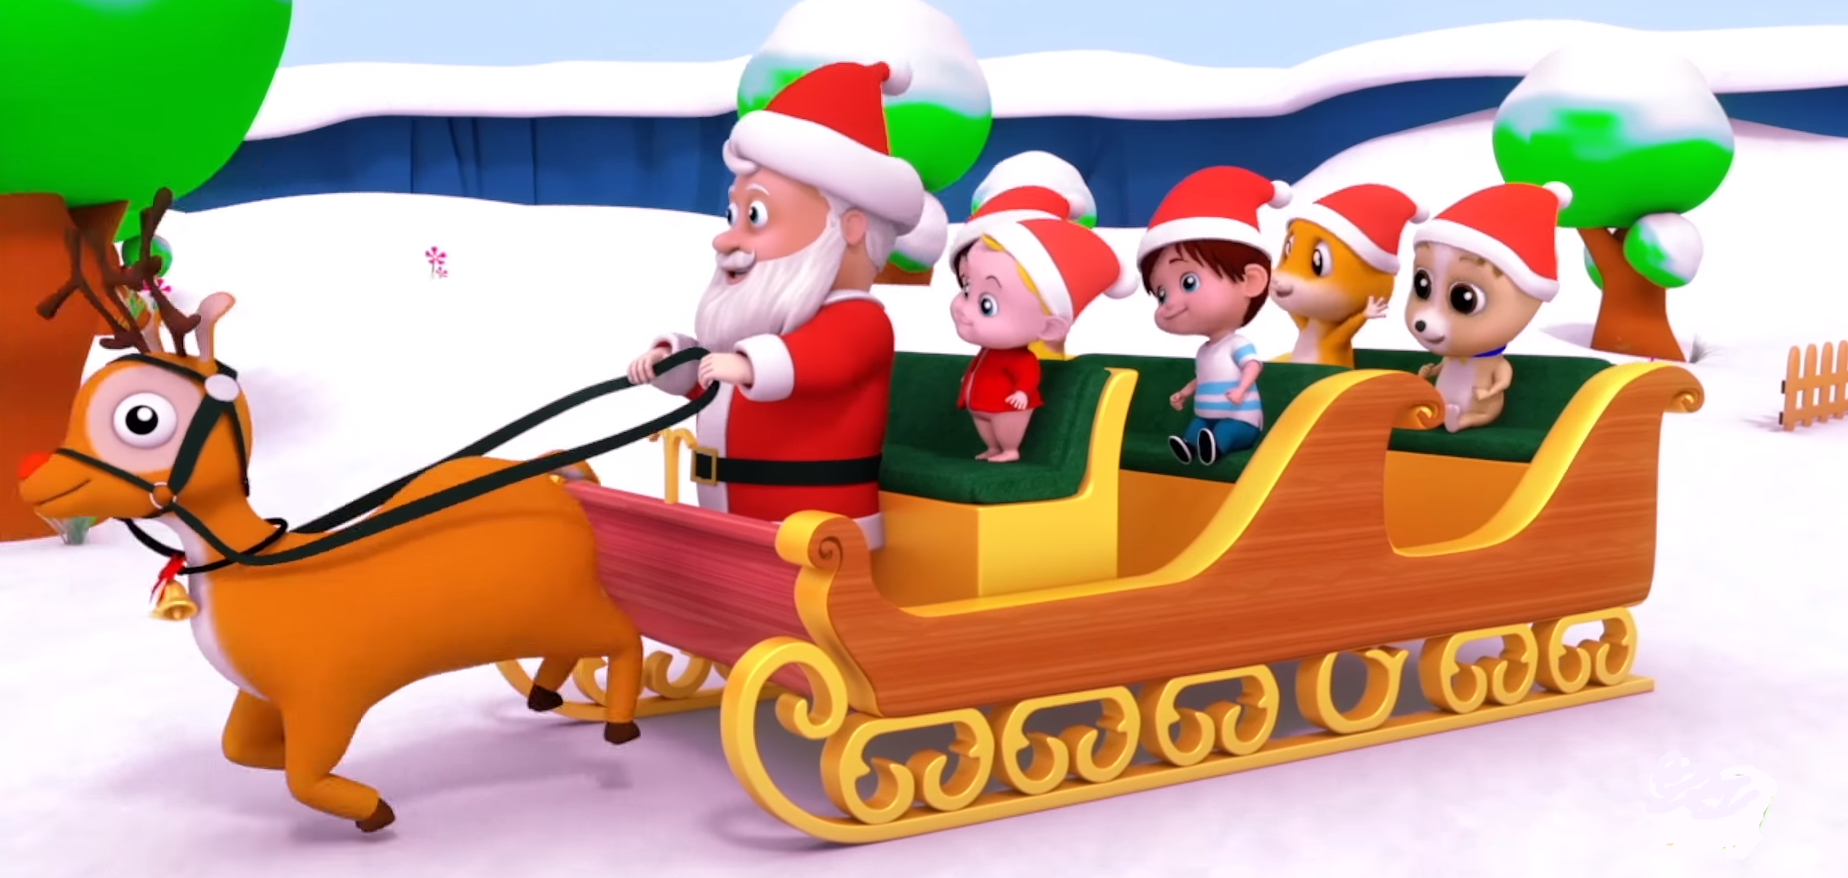 Get kids grooving with the Top 5 Children’s Christmas songs